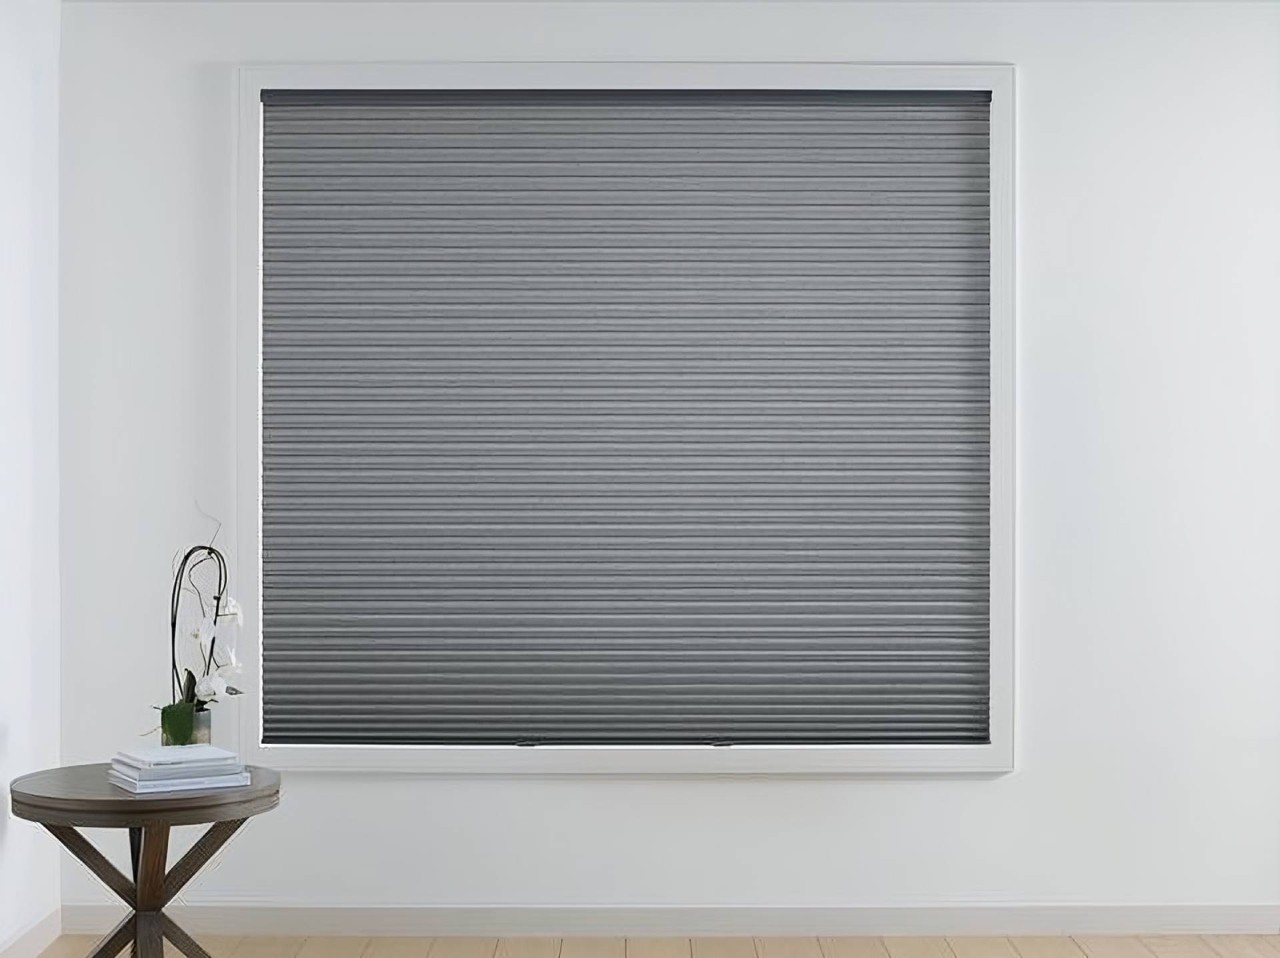 Hunter Douglas Duette® Honeycomb Shades closed completely, blocking out all light near Dallas, TX